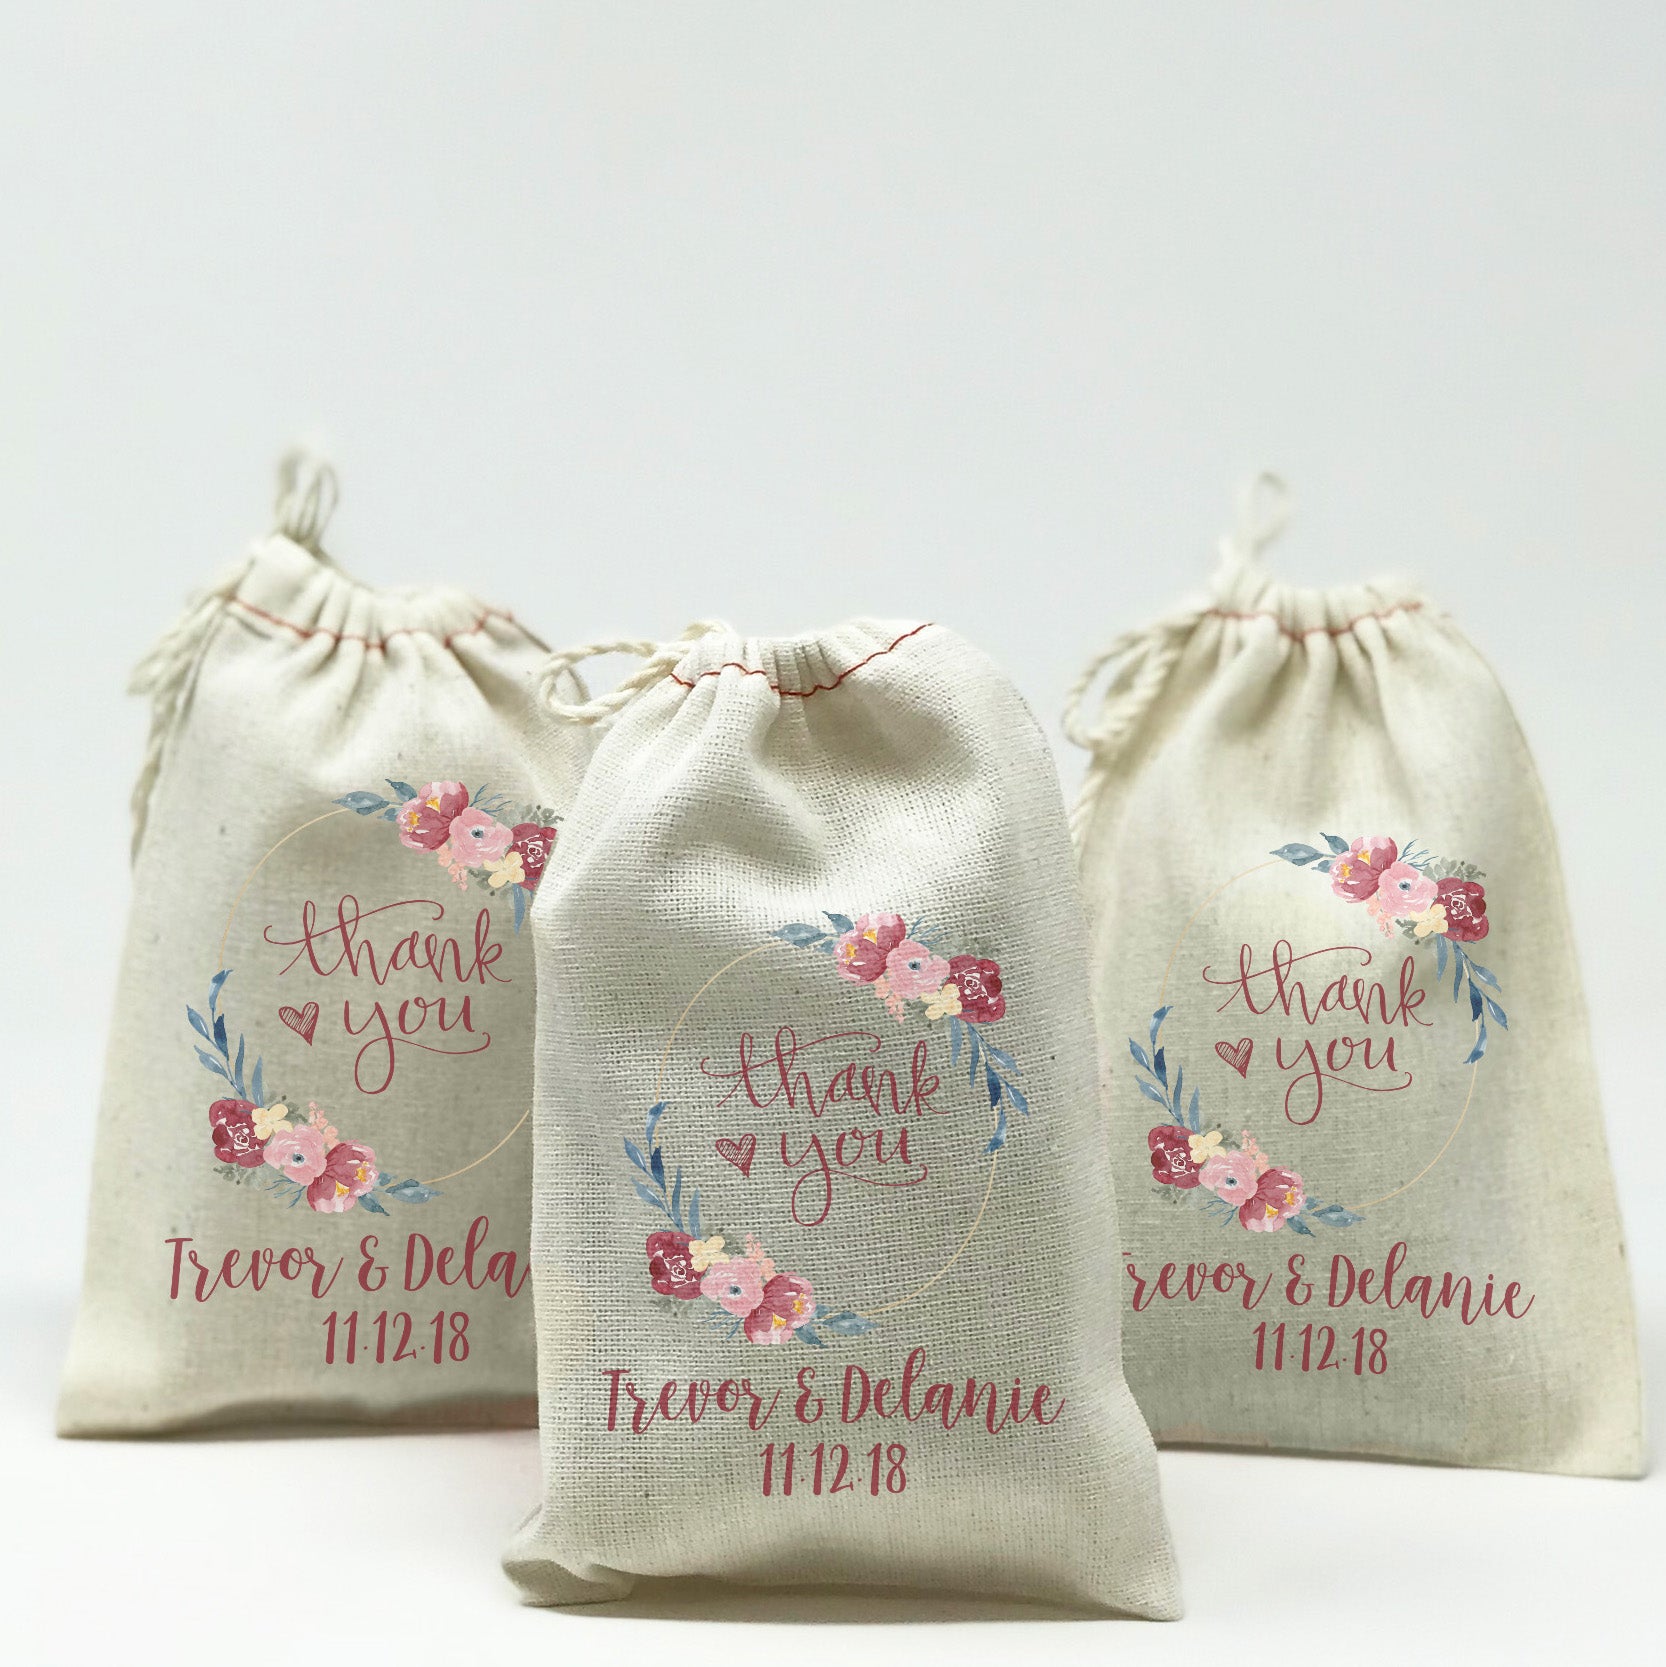 Personalized Wedding Favor Bags